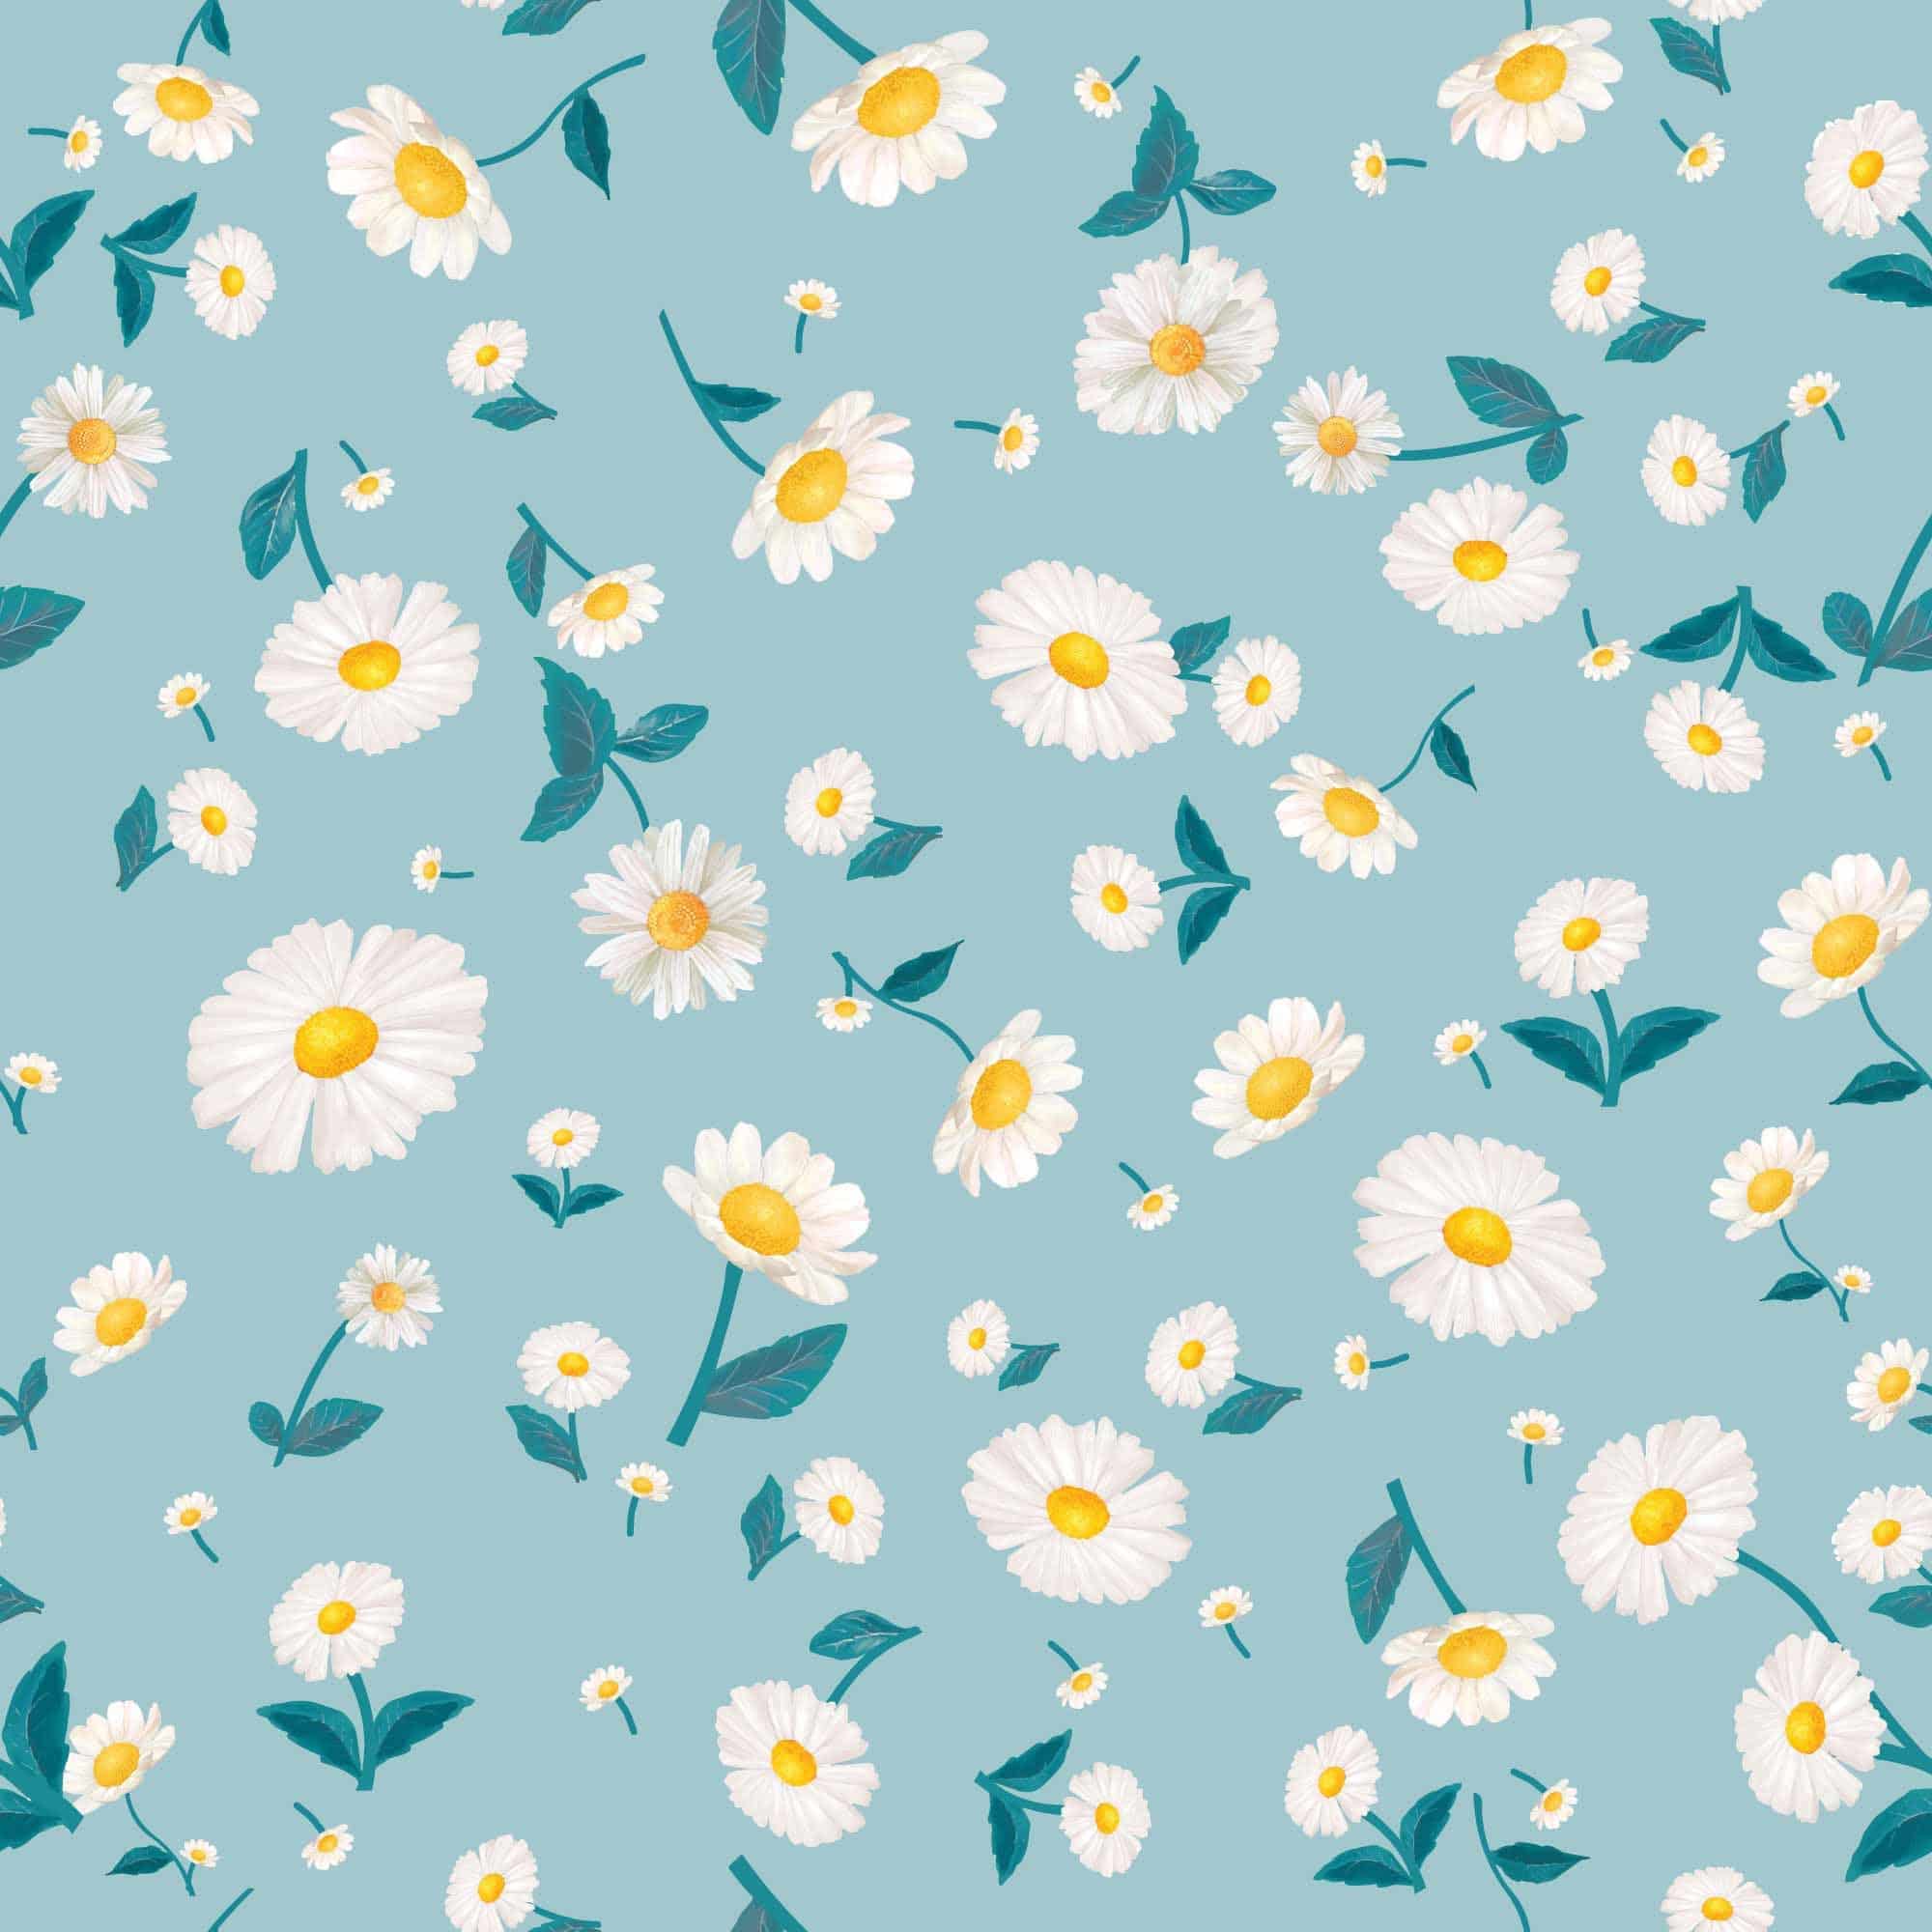 Cute Daisy Wallpaper In Blue And White And Stick Or Non Pasted